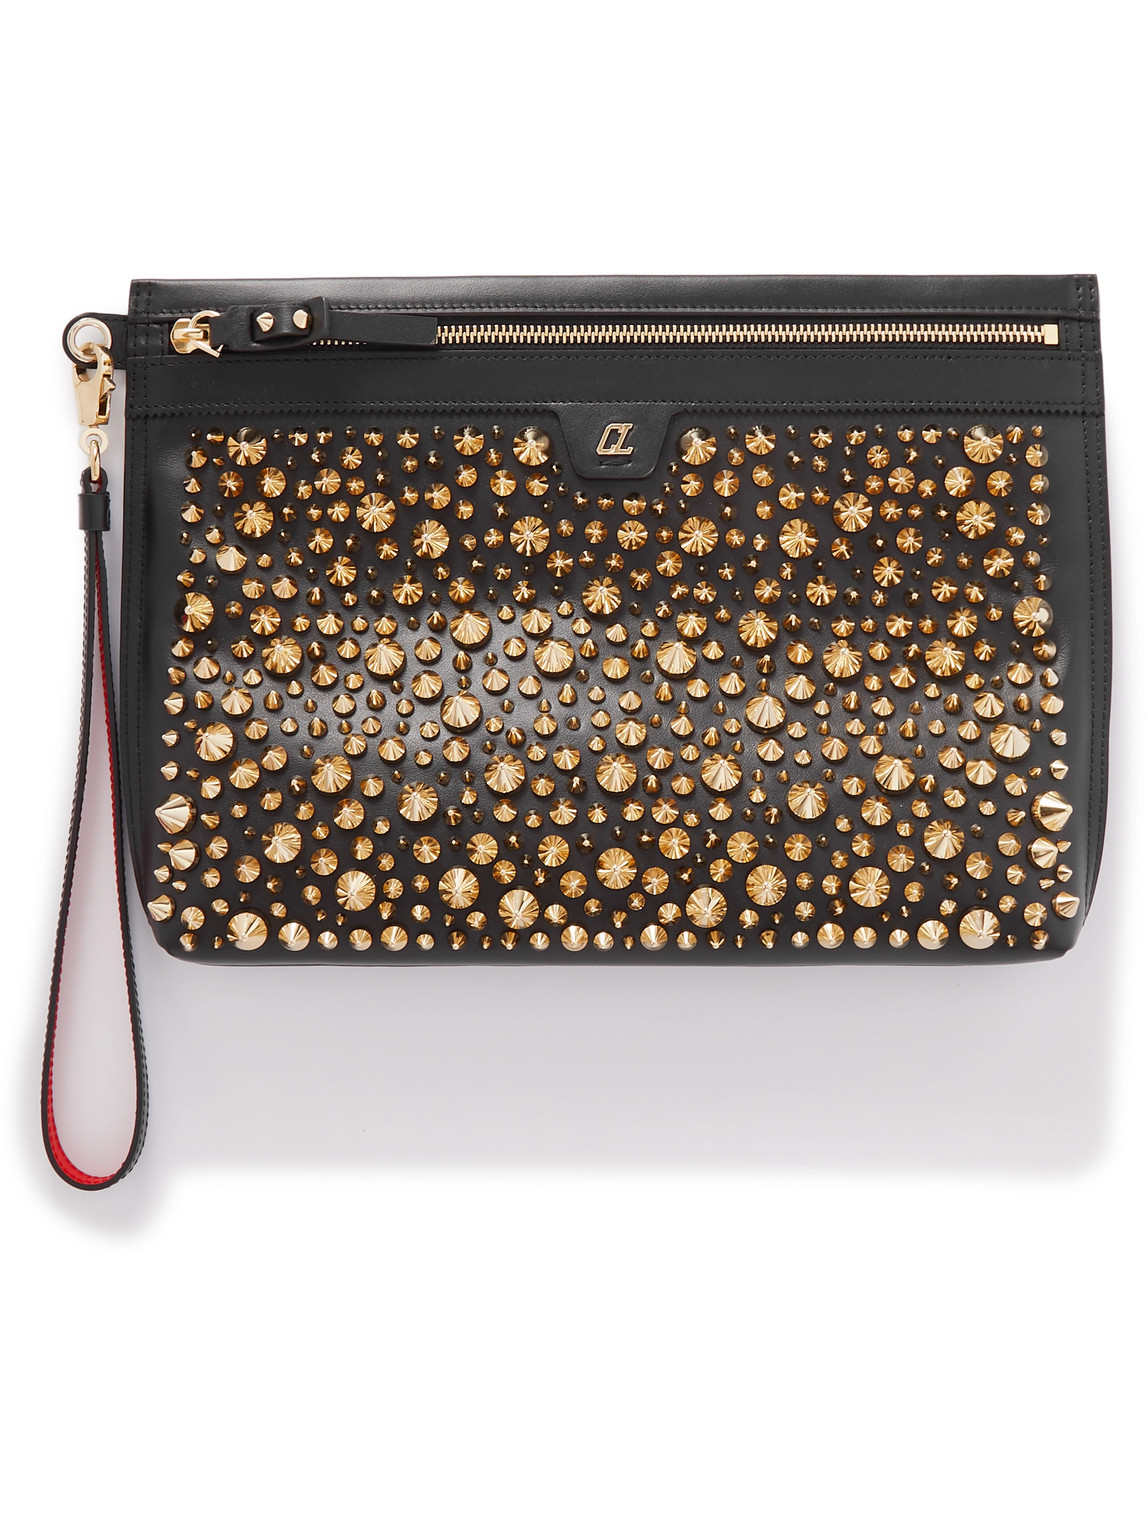 Christian Louboutin City Studded Leather Pouch In Black